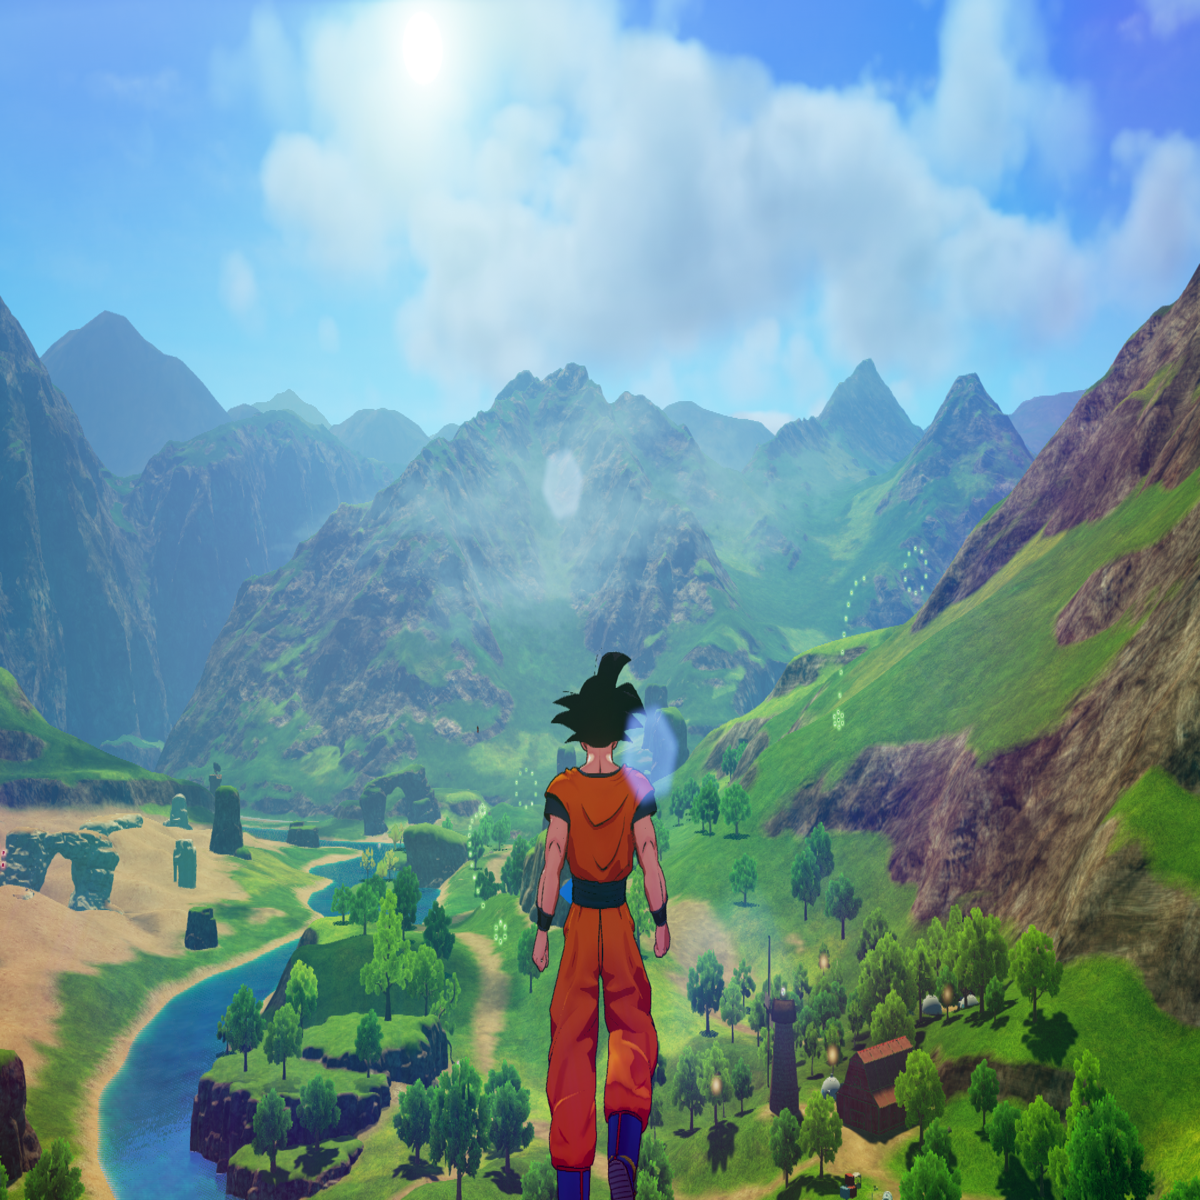 Dragon Ball Xenoverse Season 3: Expected release date, leaks, and more